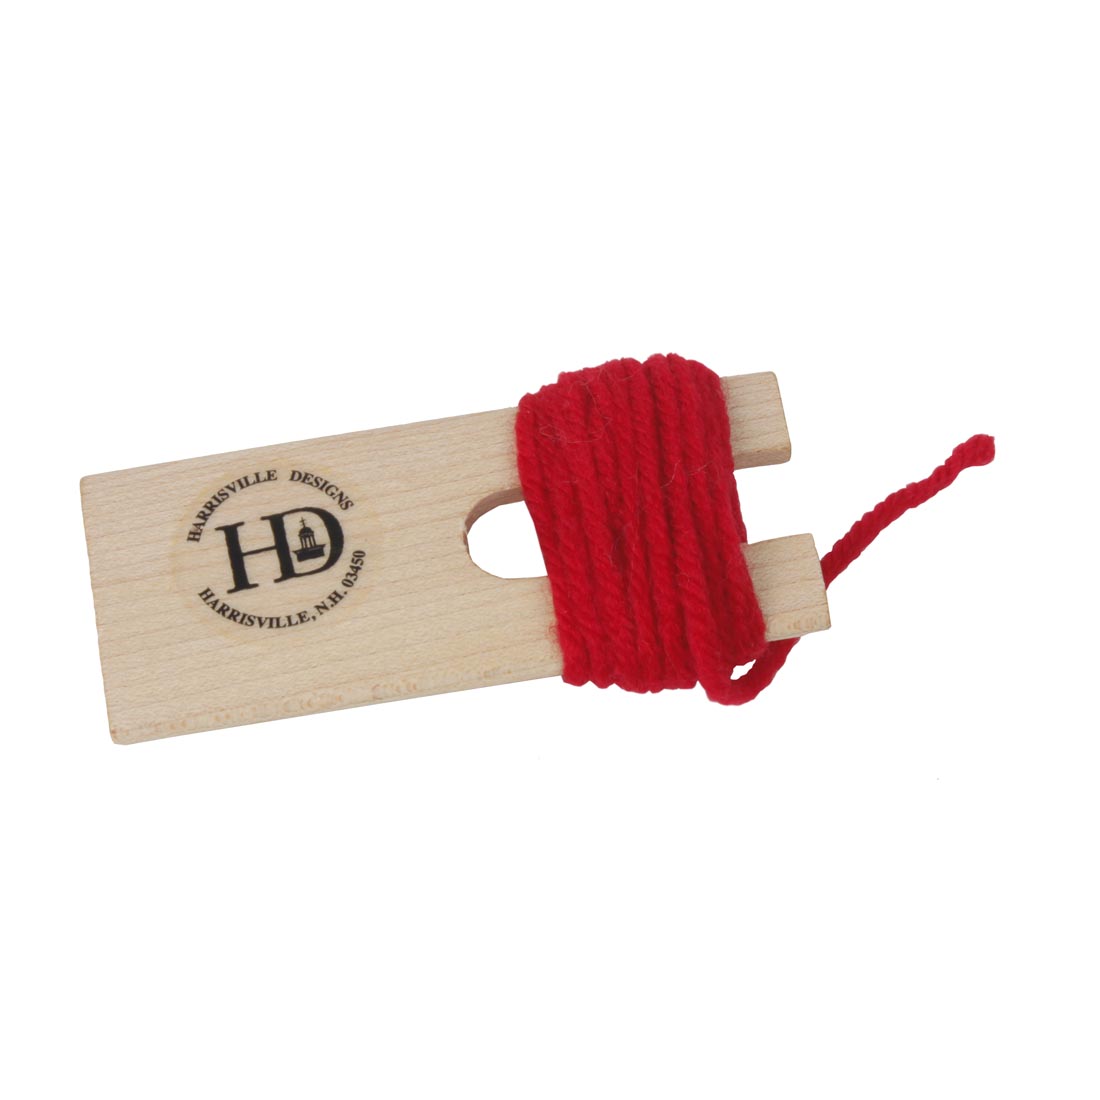 Harrisville Designs Pom Pom Maker in use with red yarn